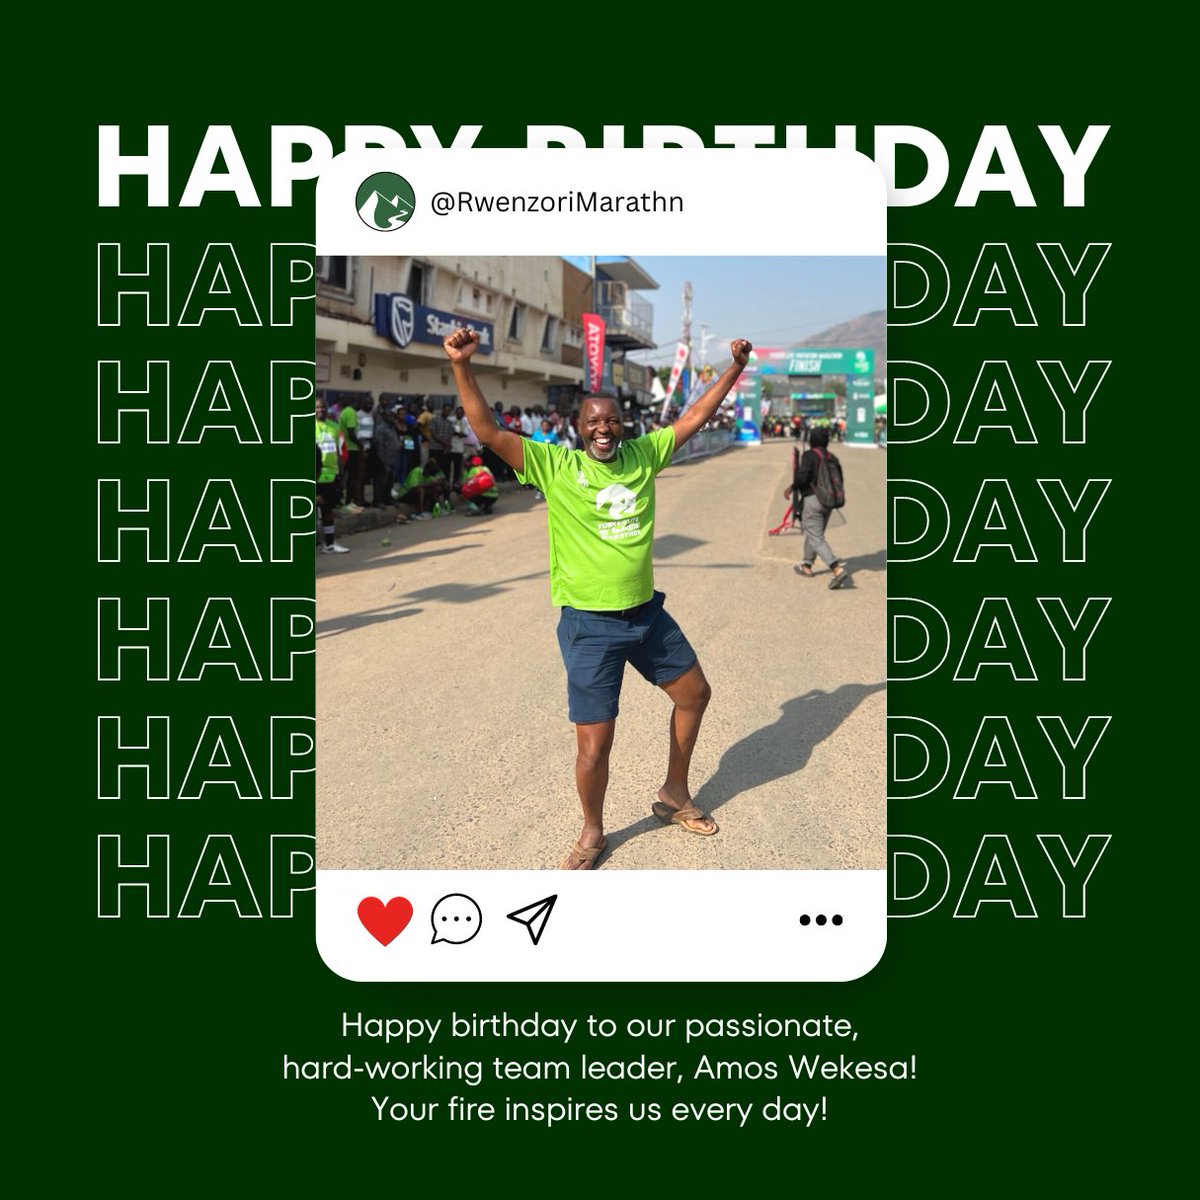 Happy birthday to the boss: @wekesa_amos! Without you, there would be no #TuskerLiteRwenzoriMarathon. Your passion inspires us to reach further and plan for the impossible every day. 🔥🔥🔥